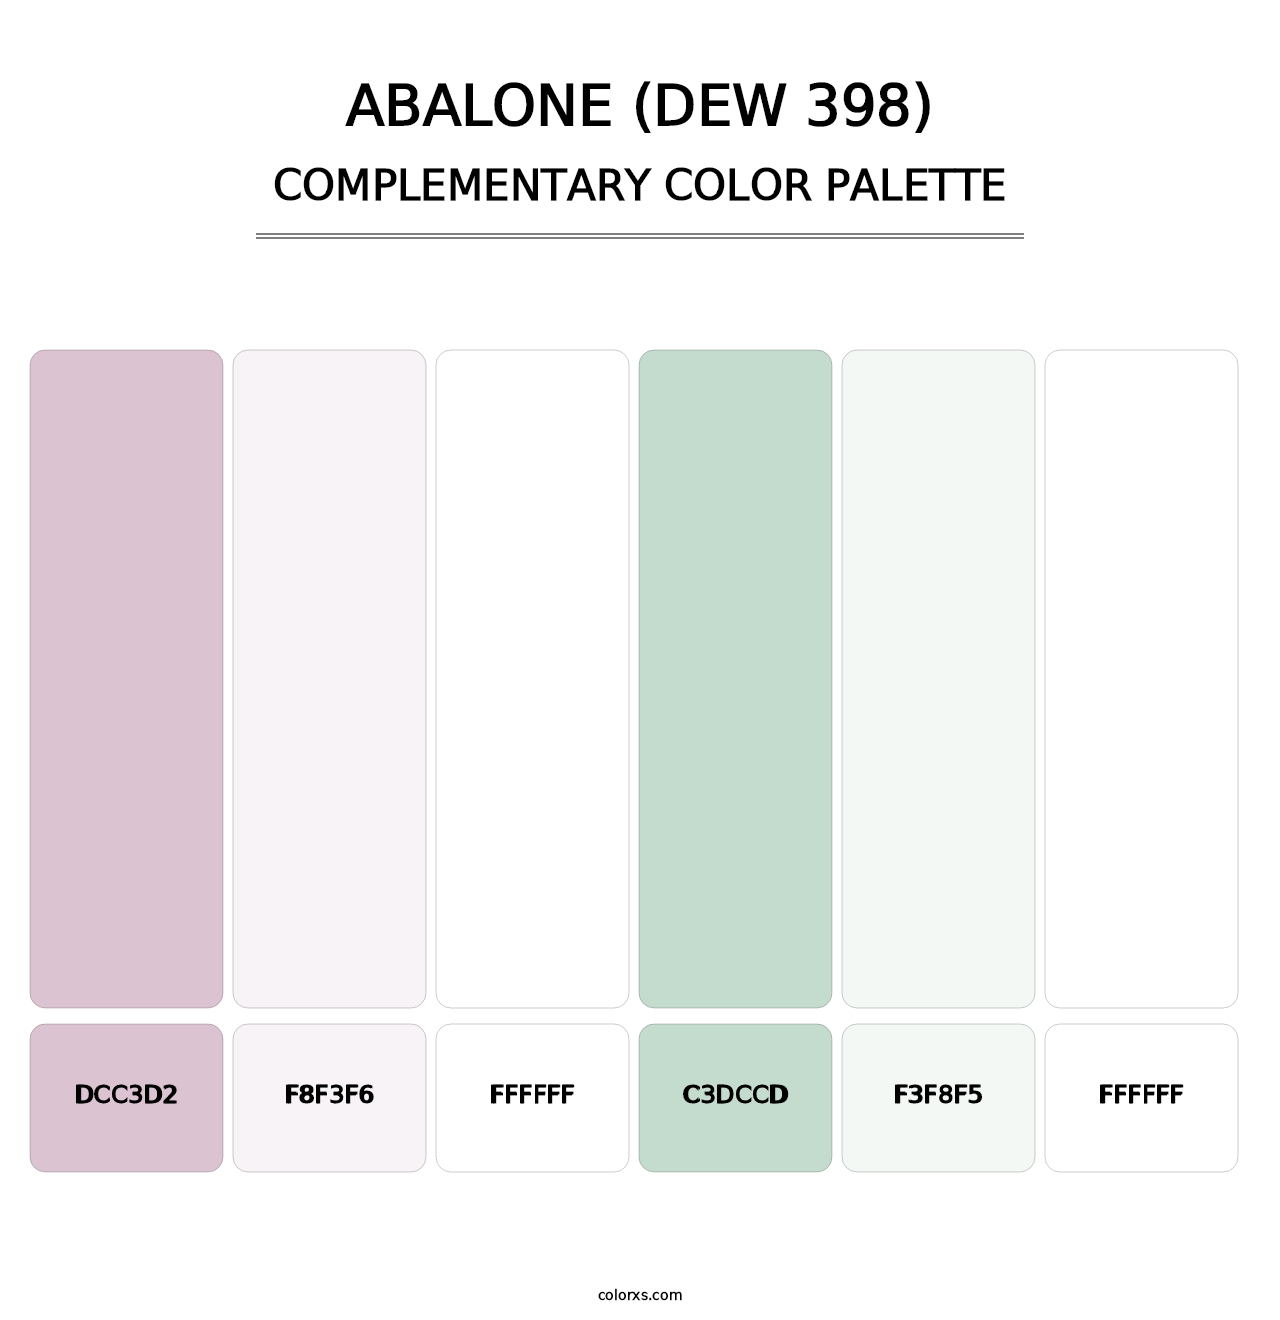 Abalone (DEW 398) - Complementary Color Palette